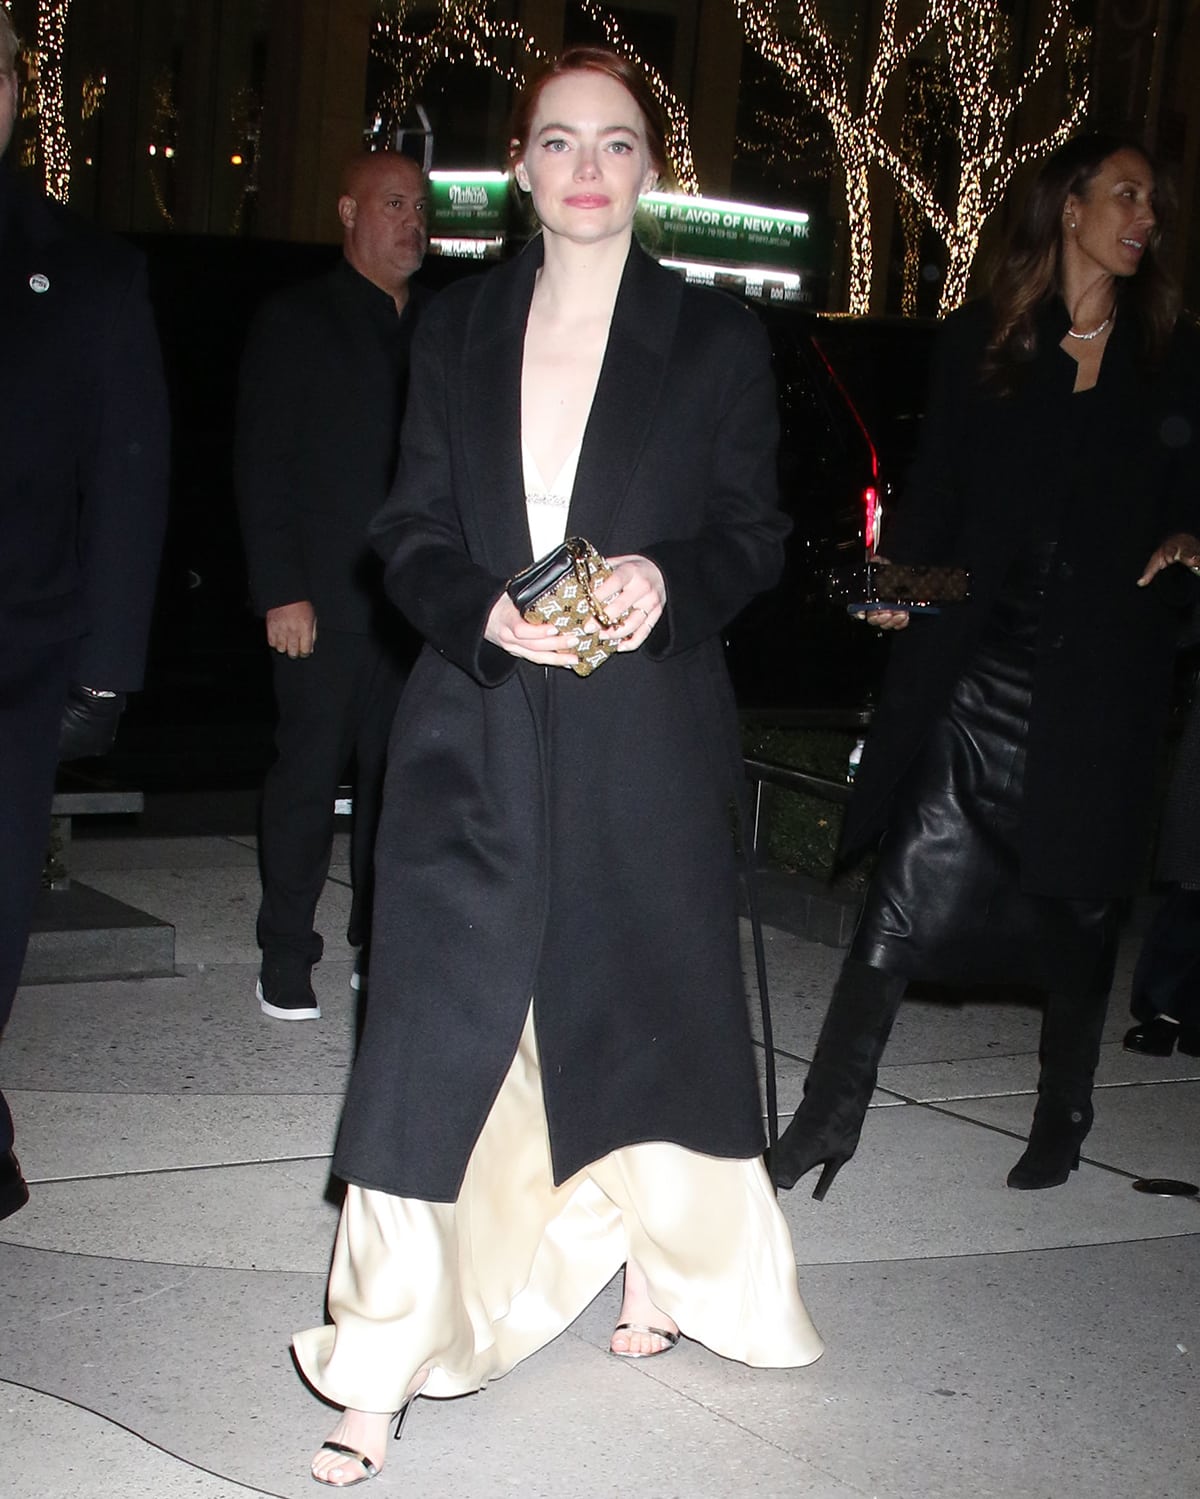 Emma Stone swaps her see-through yellow dress for a plunging slip dress as she attends the Poor Things premiere after-party at AVRA Estiatorio